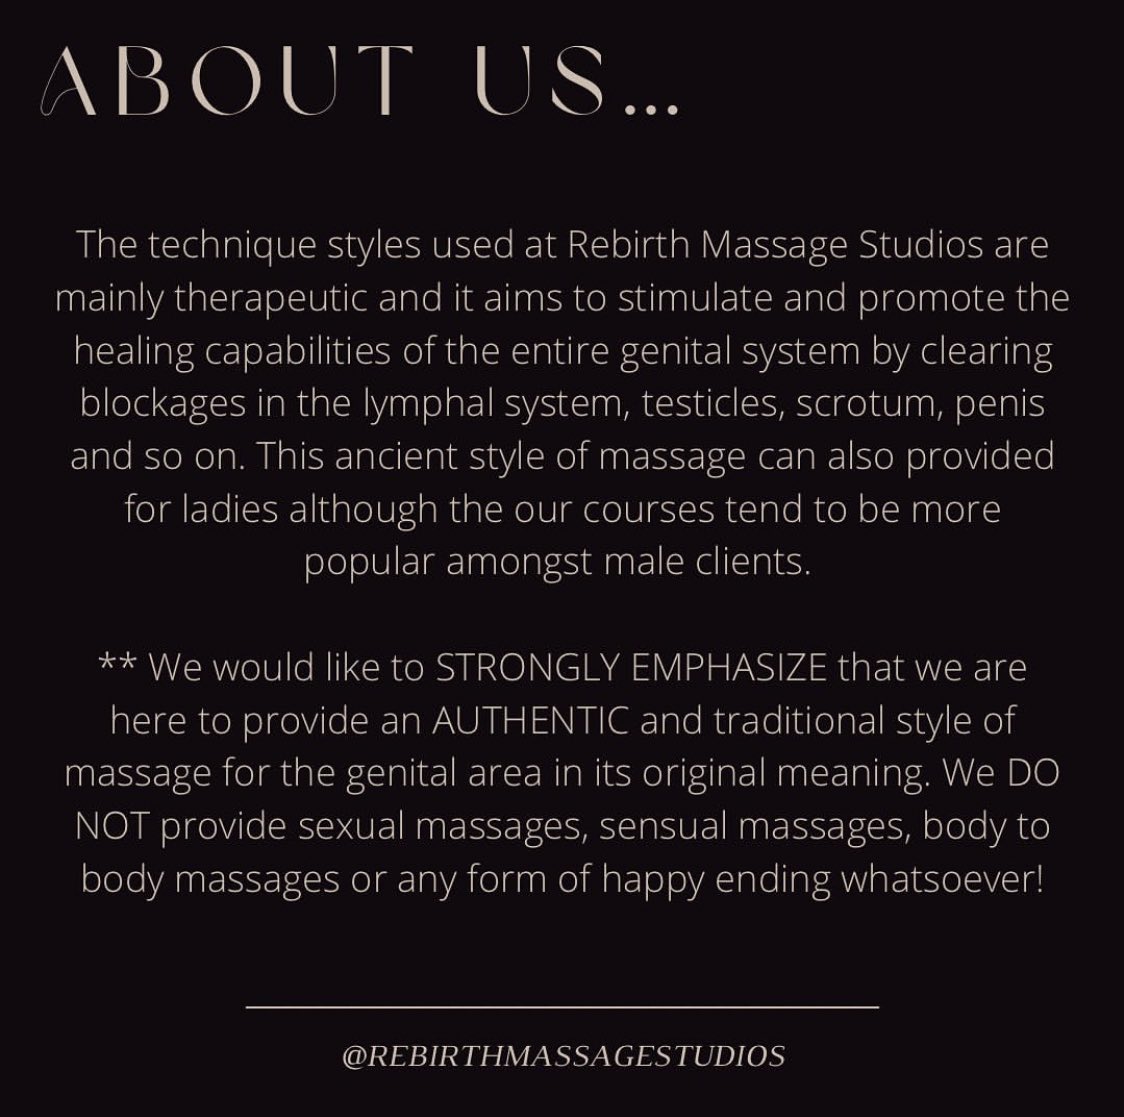 A short write up about us and the services we offer…

We can’t emphasize more that we are genuinely here to provide authentic therapeutic help, we are not here to give you a happy ending.

#rebirthmassagestudios #erectiondysfunction #erectiledysfunction #sexualproblem #抓痕